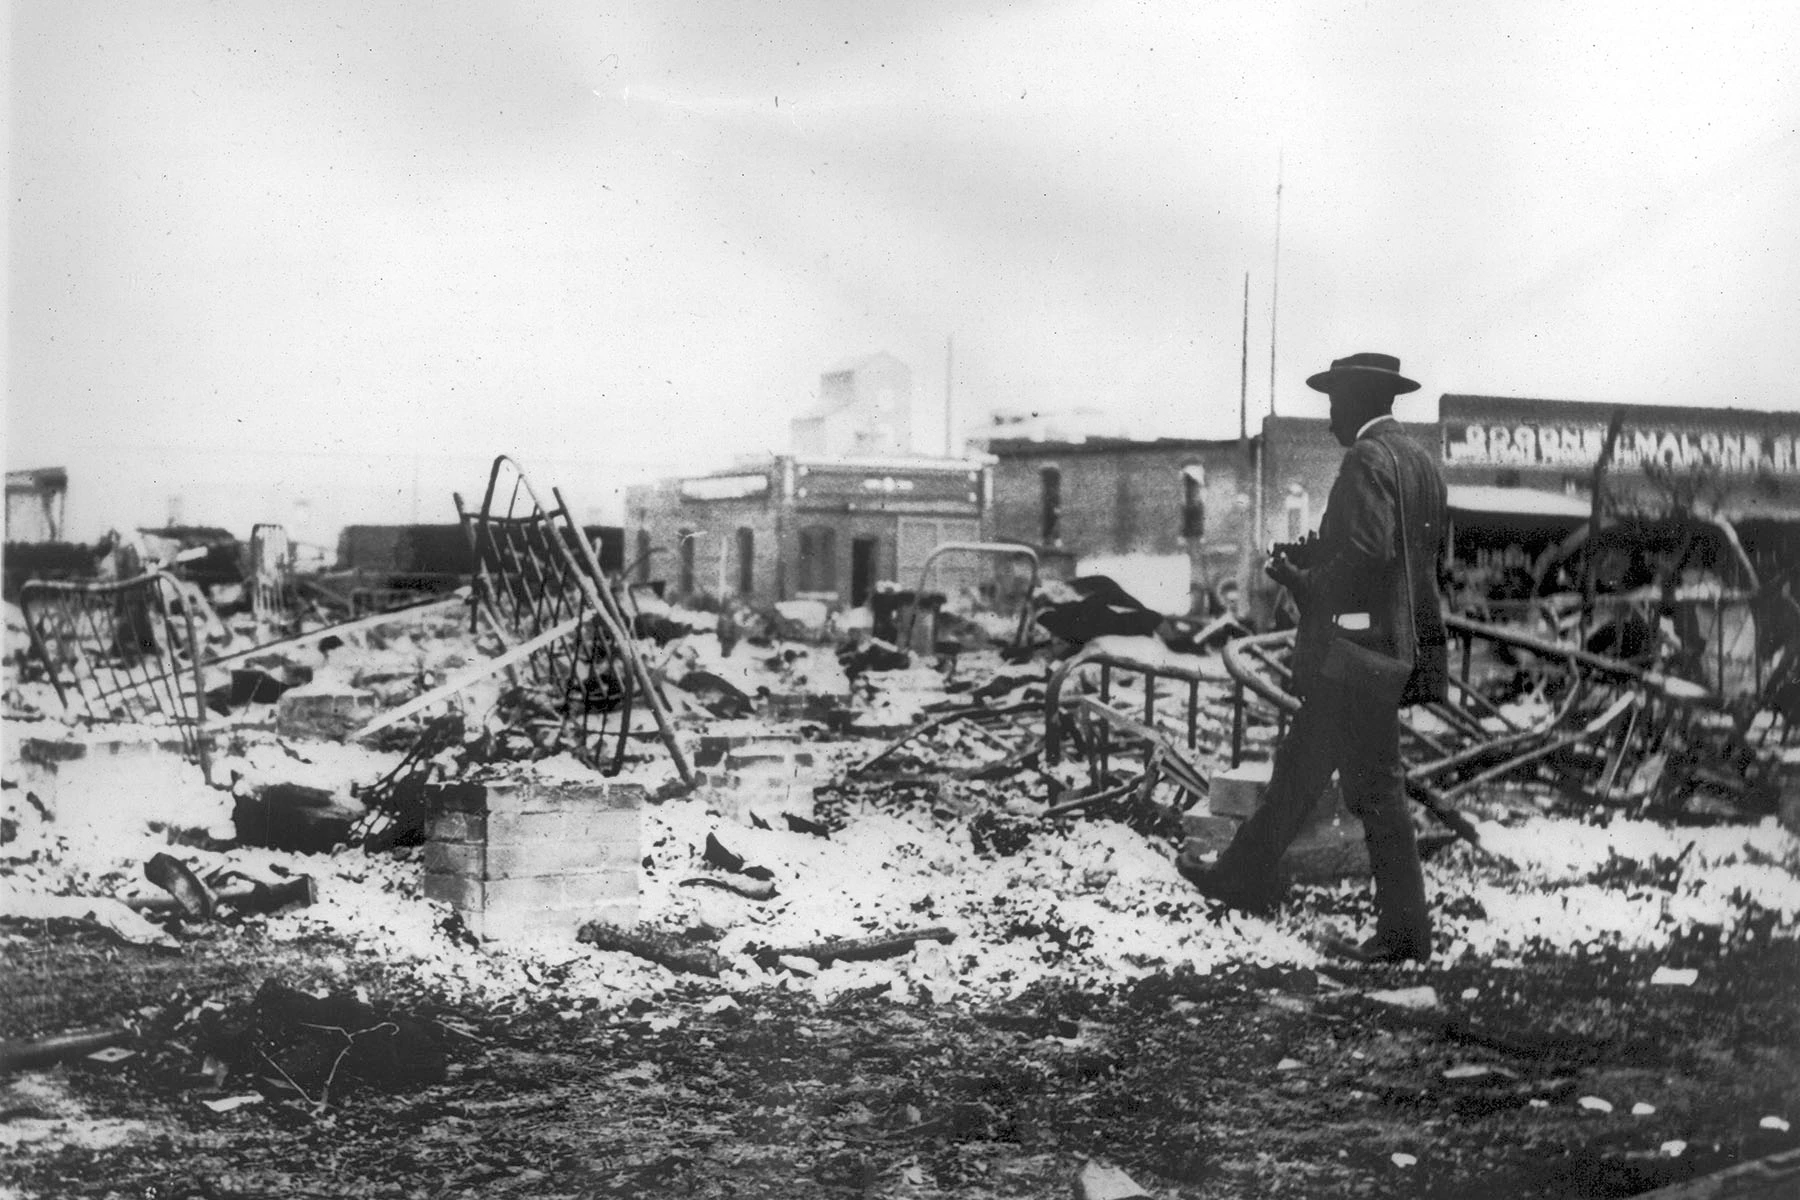 A black man with a camera looks at the skeletons of iron beds which rise above the ashes of a burned-out block after the Tulsa Massacre.